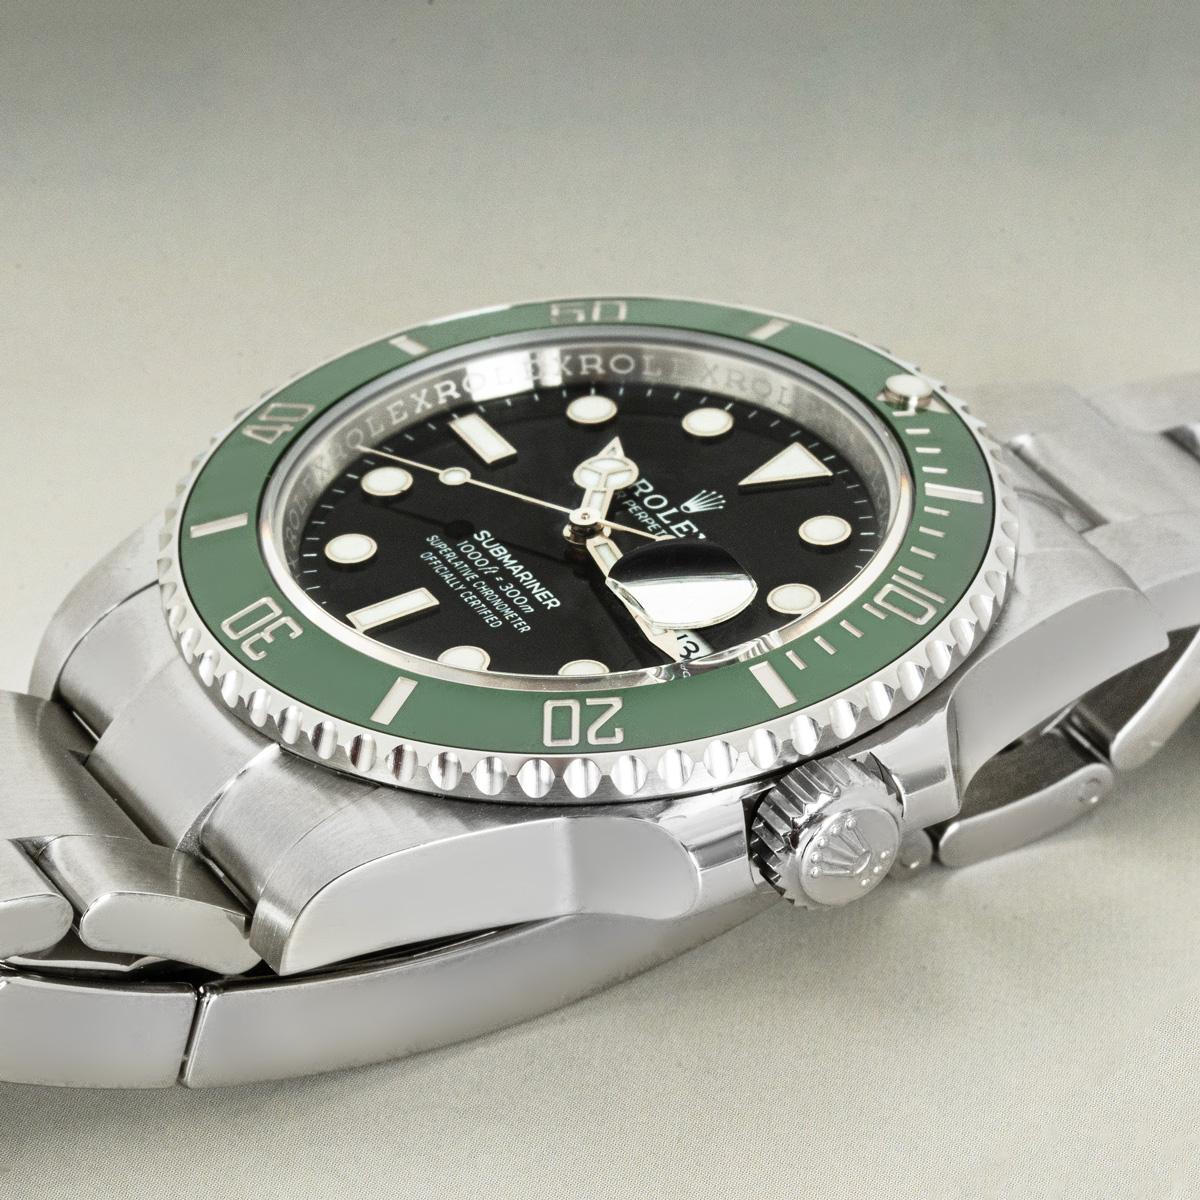 An unworn 41mm Submariner Date known as both a Kermit or Starbucks, from Rolex in Oystersteel. Features a black dial with the date display and a green ceramic unidirectional rotatable bezel; with this being a 2024 model, the shade of green used for